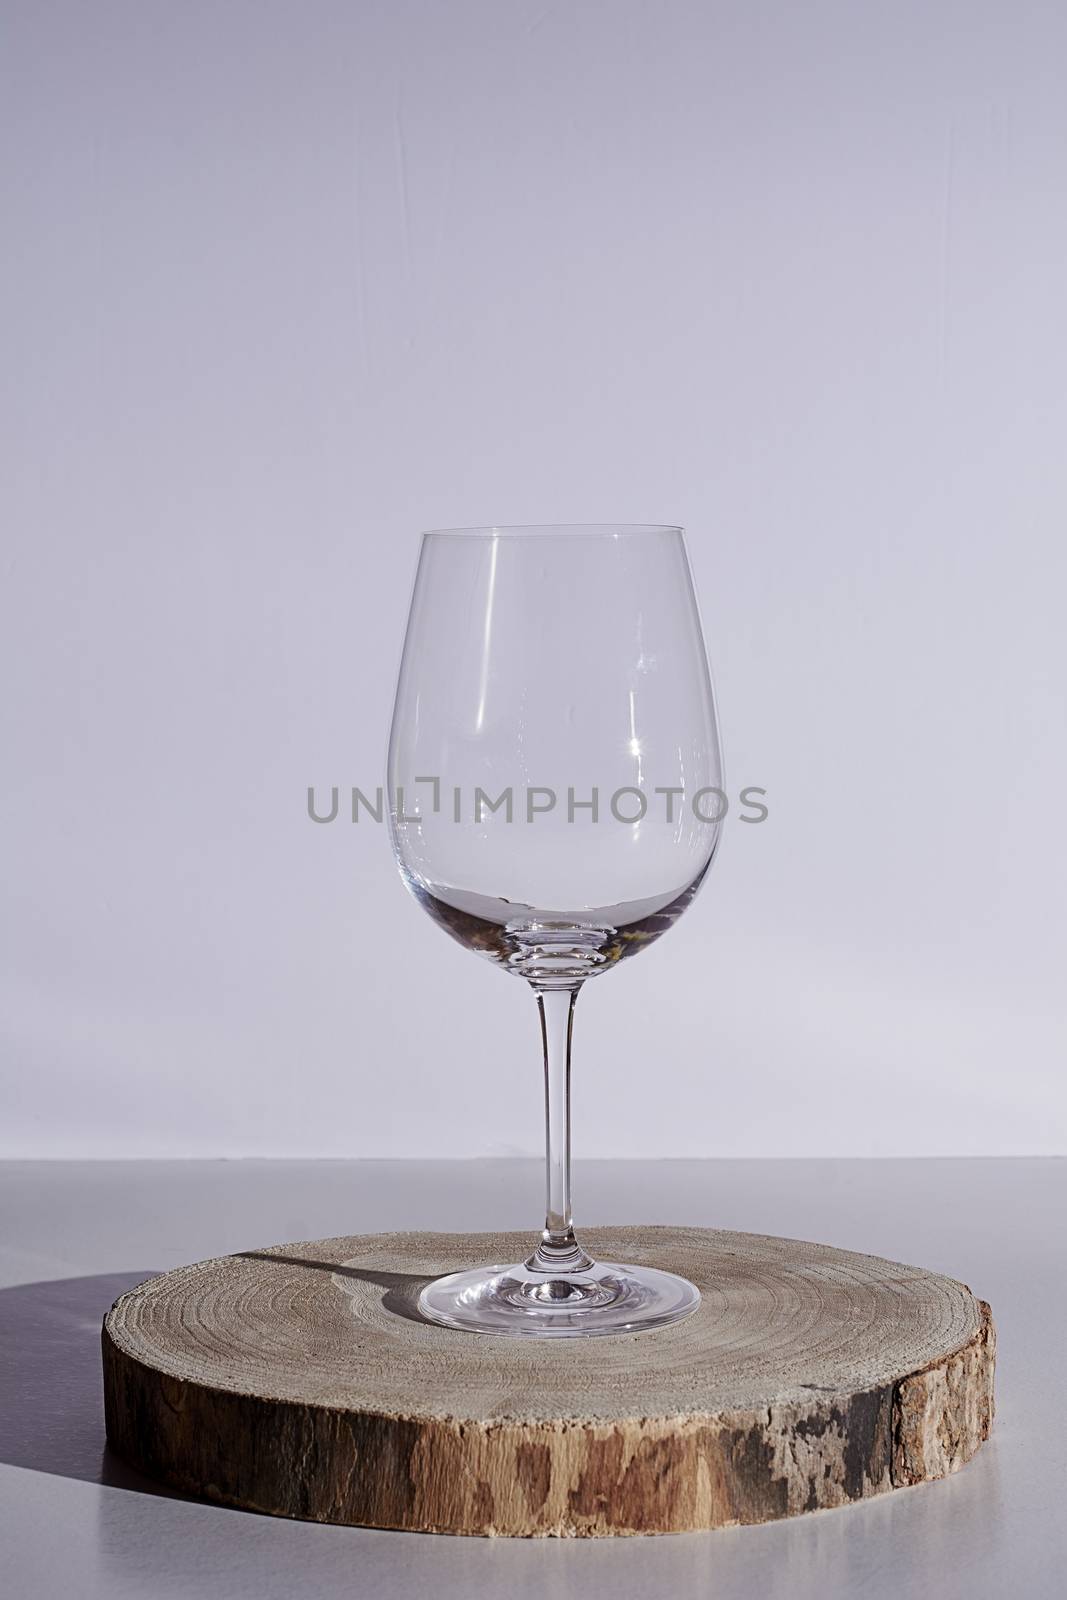 Glass of wine on white background, high key, wooden stump